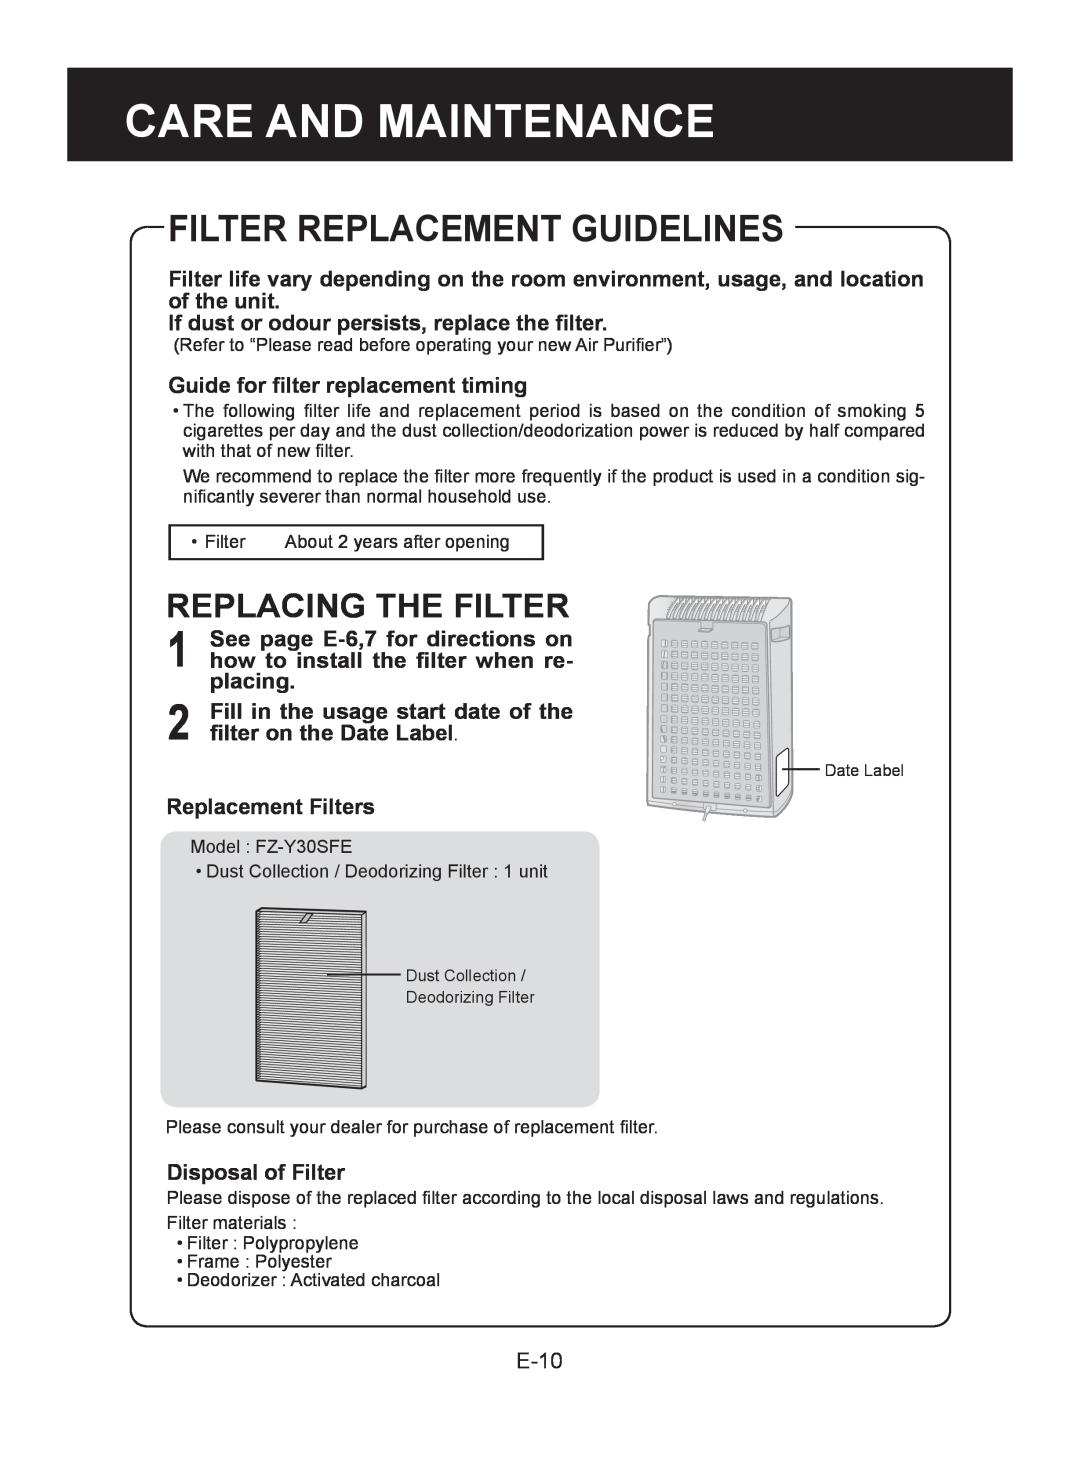 Sharp FU-Z31E operation manual Filter Replacement Guidelines, Replacing The Filter, Care And Maintenance 